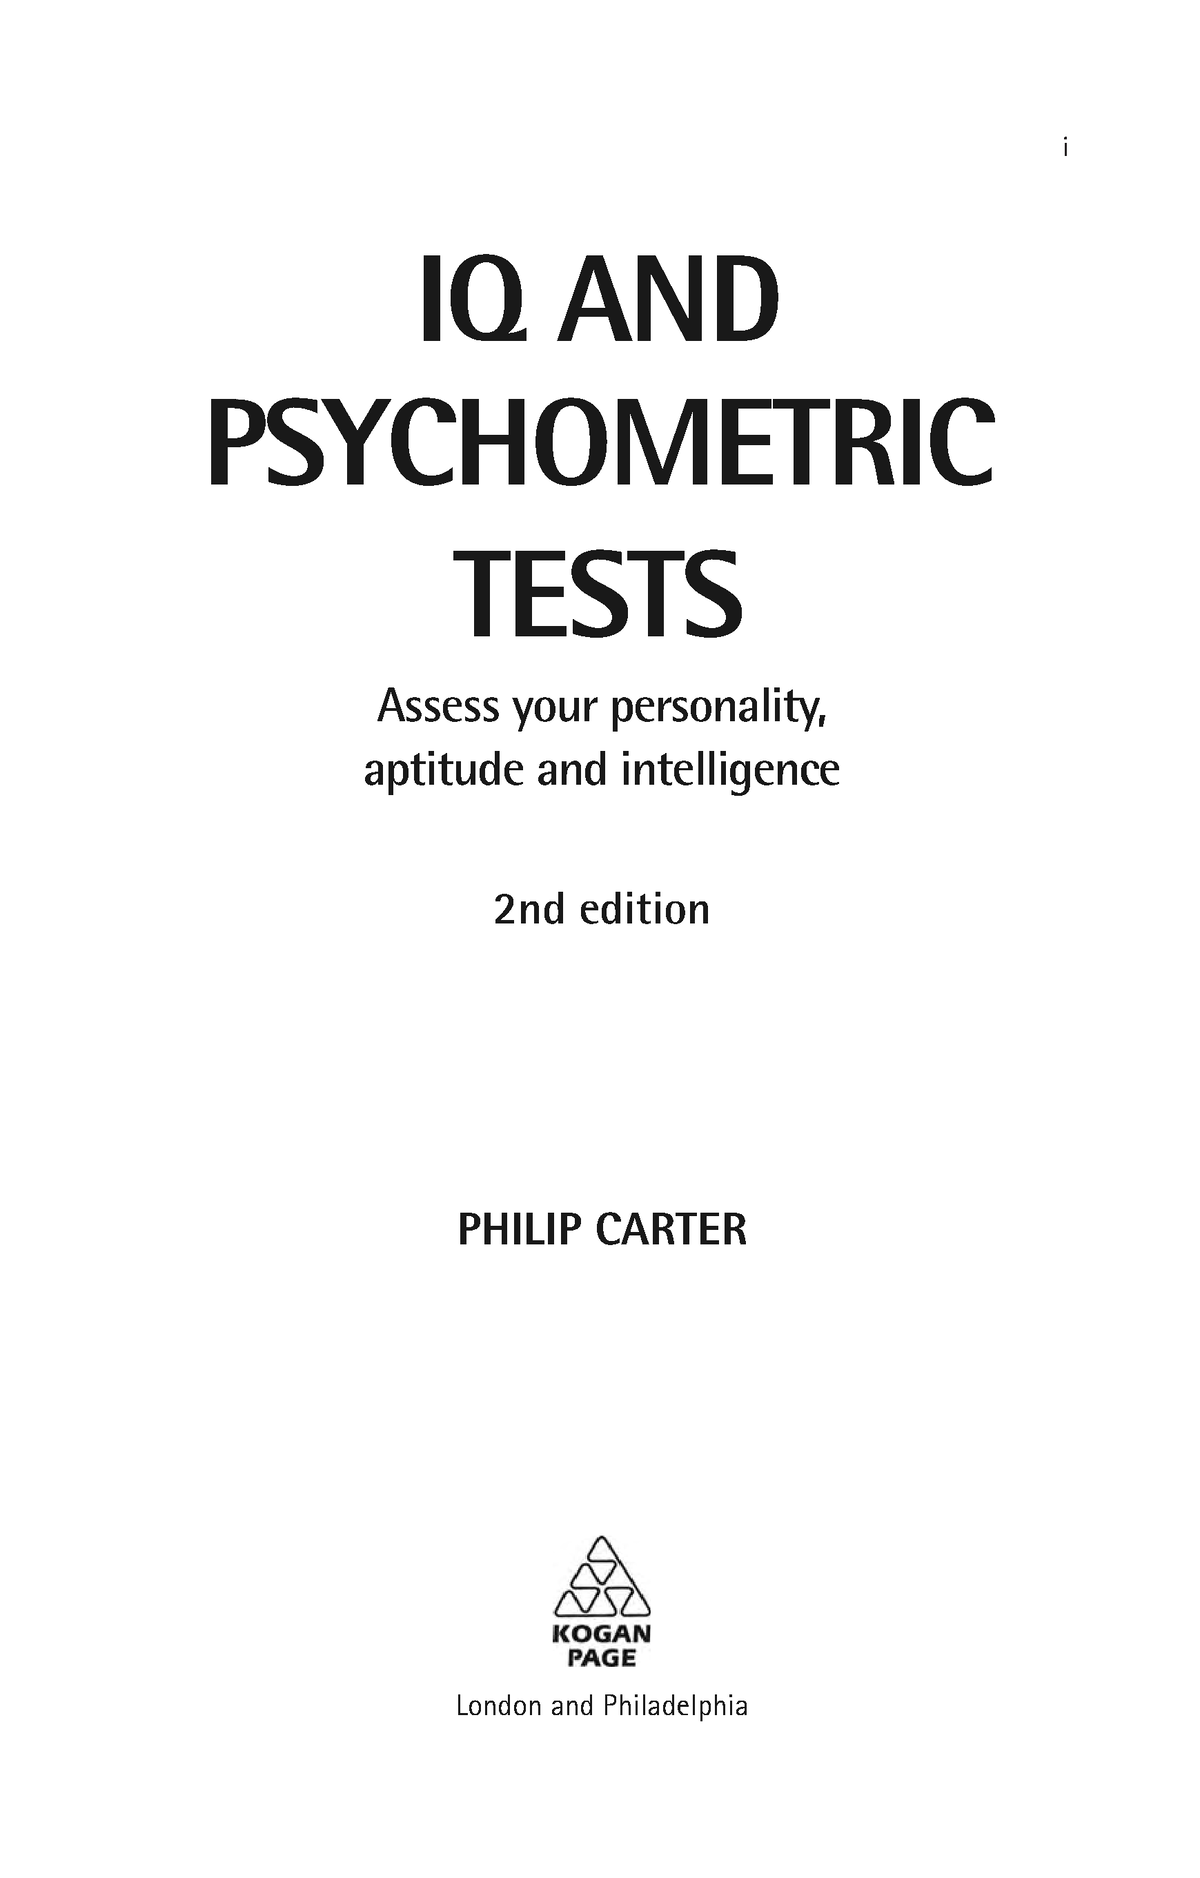 iq-and-psychometric-tests-assess-your-personality-aptitude-and-intelligence-by-philip-carter-z